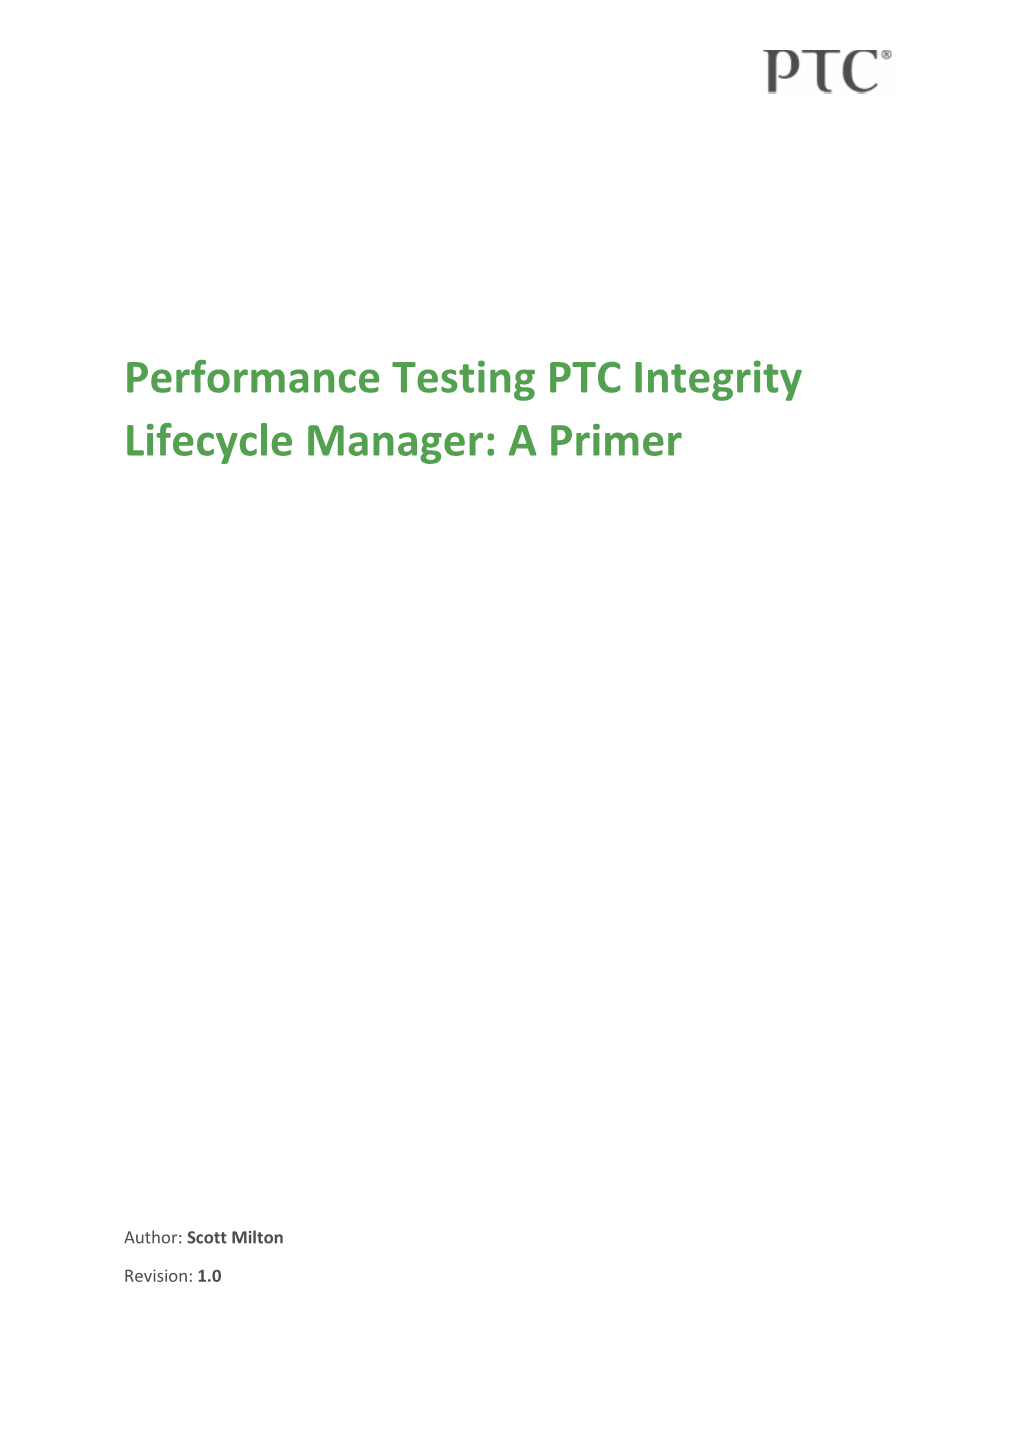 Performance Testing PTC Integrity Lifecycle Manager: a Primer